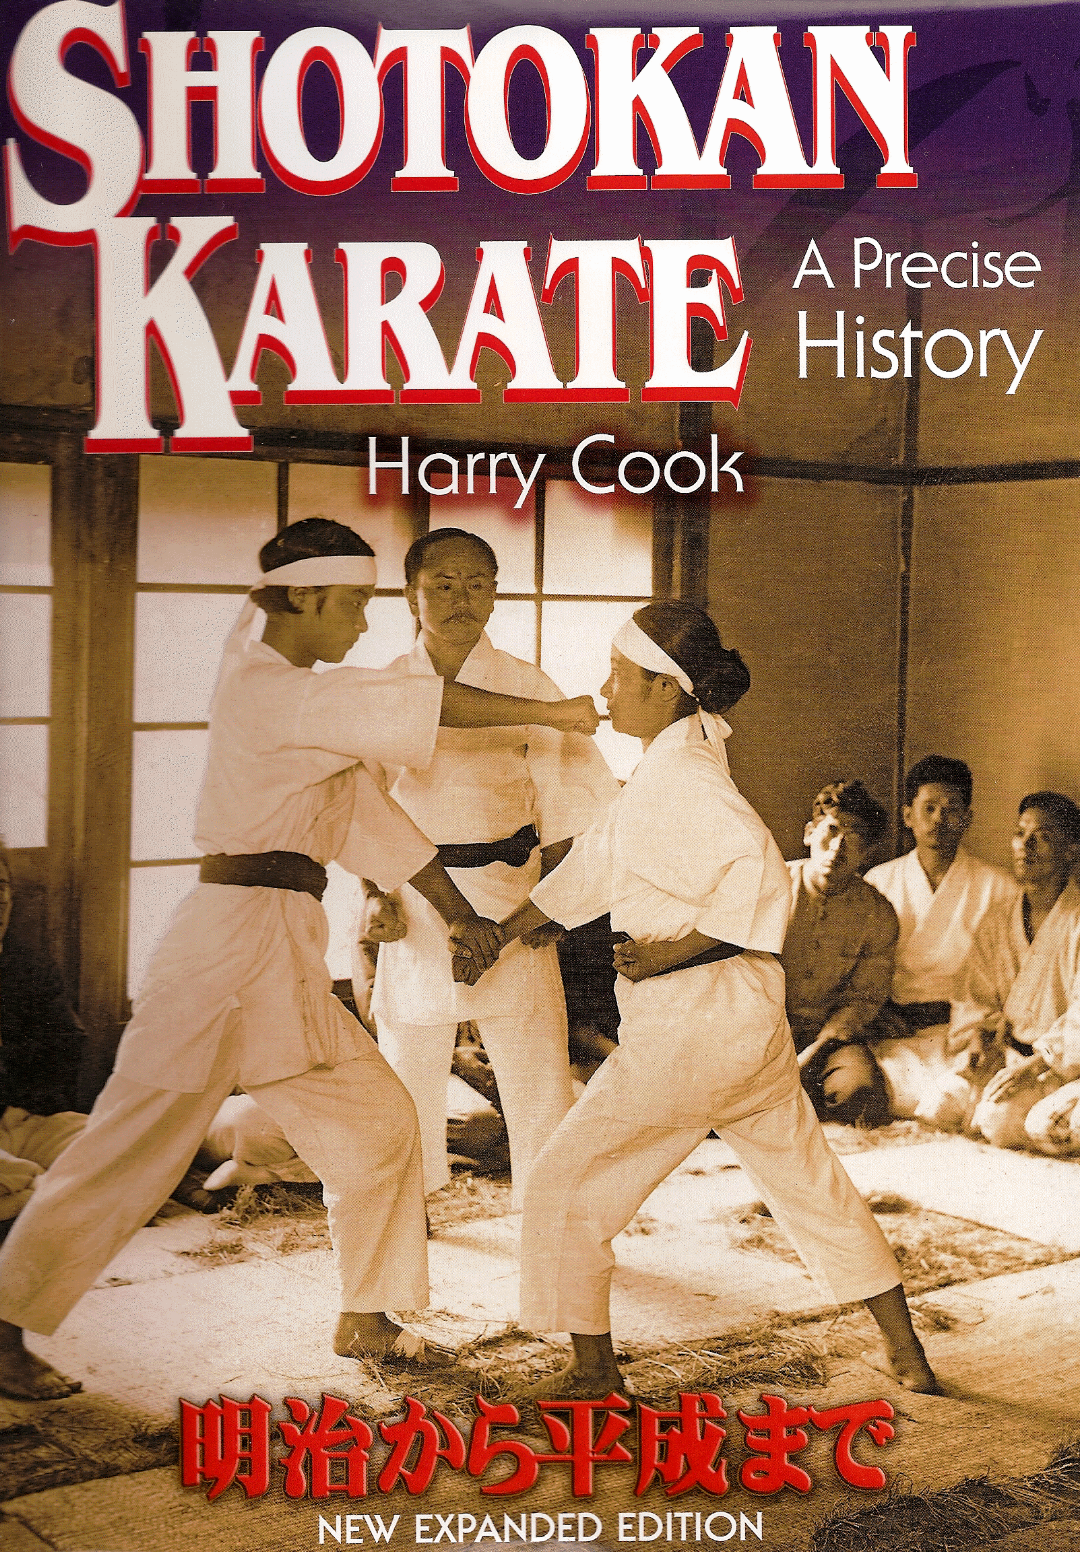 Shotokan Karate: A Precise History 2nd Ed Book by Harry Cook - Budovideos Inc